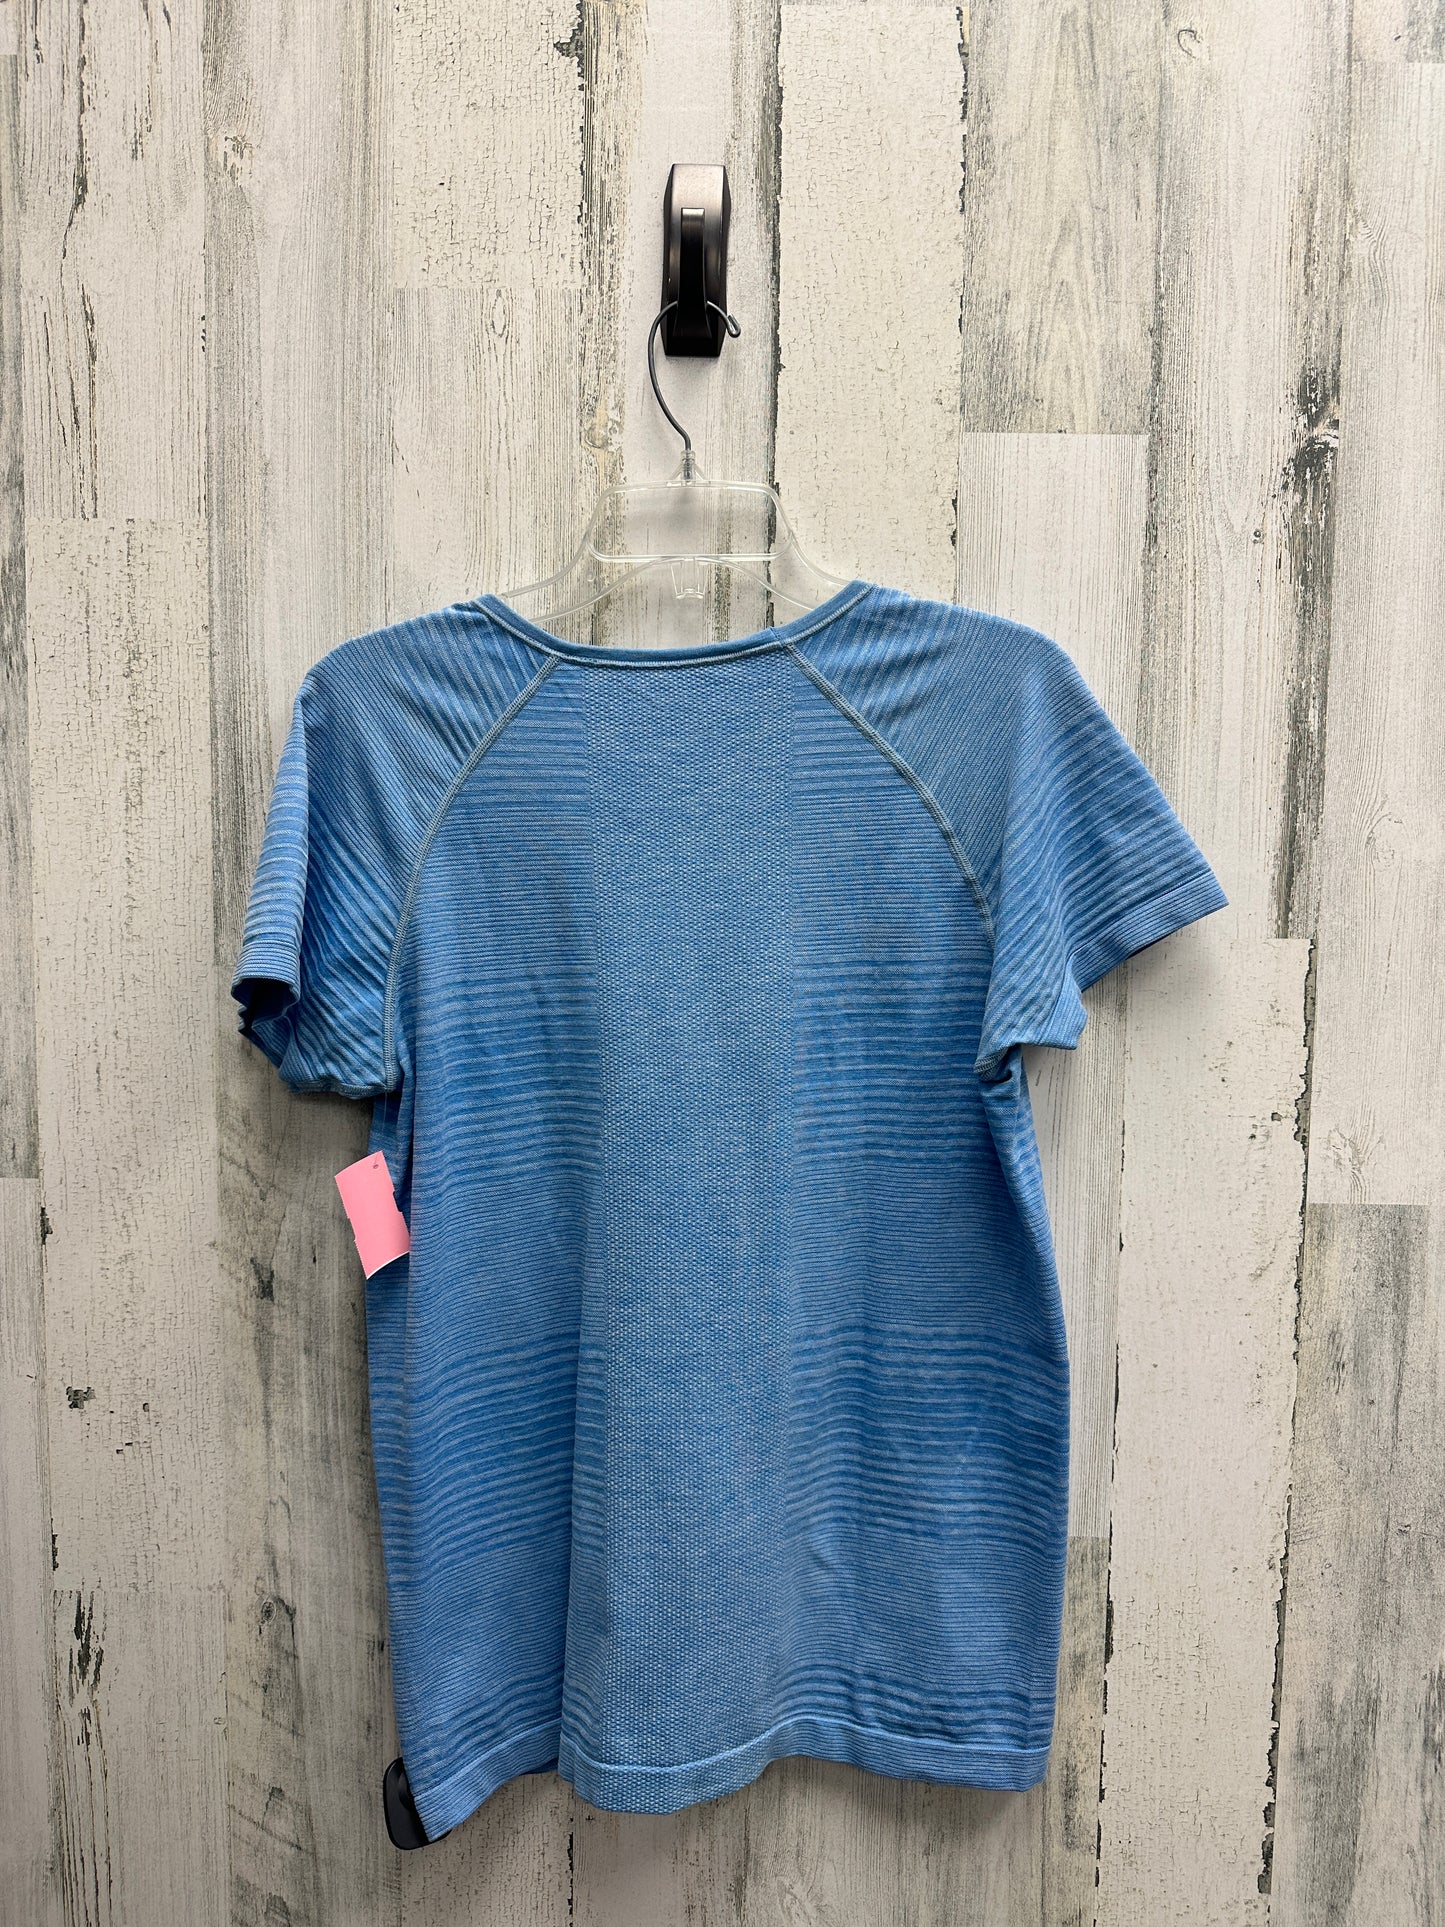 Top Short Sleeve By Patagonia  Size: L